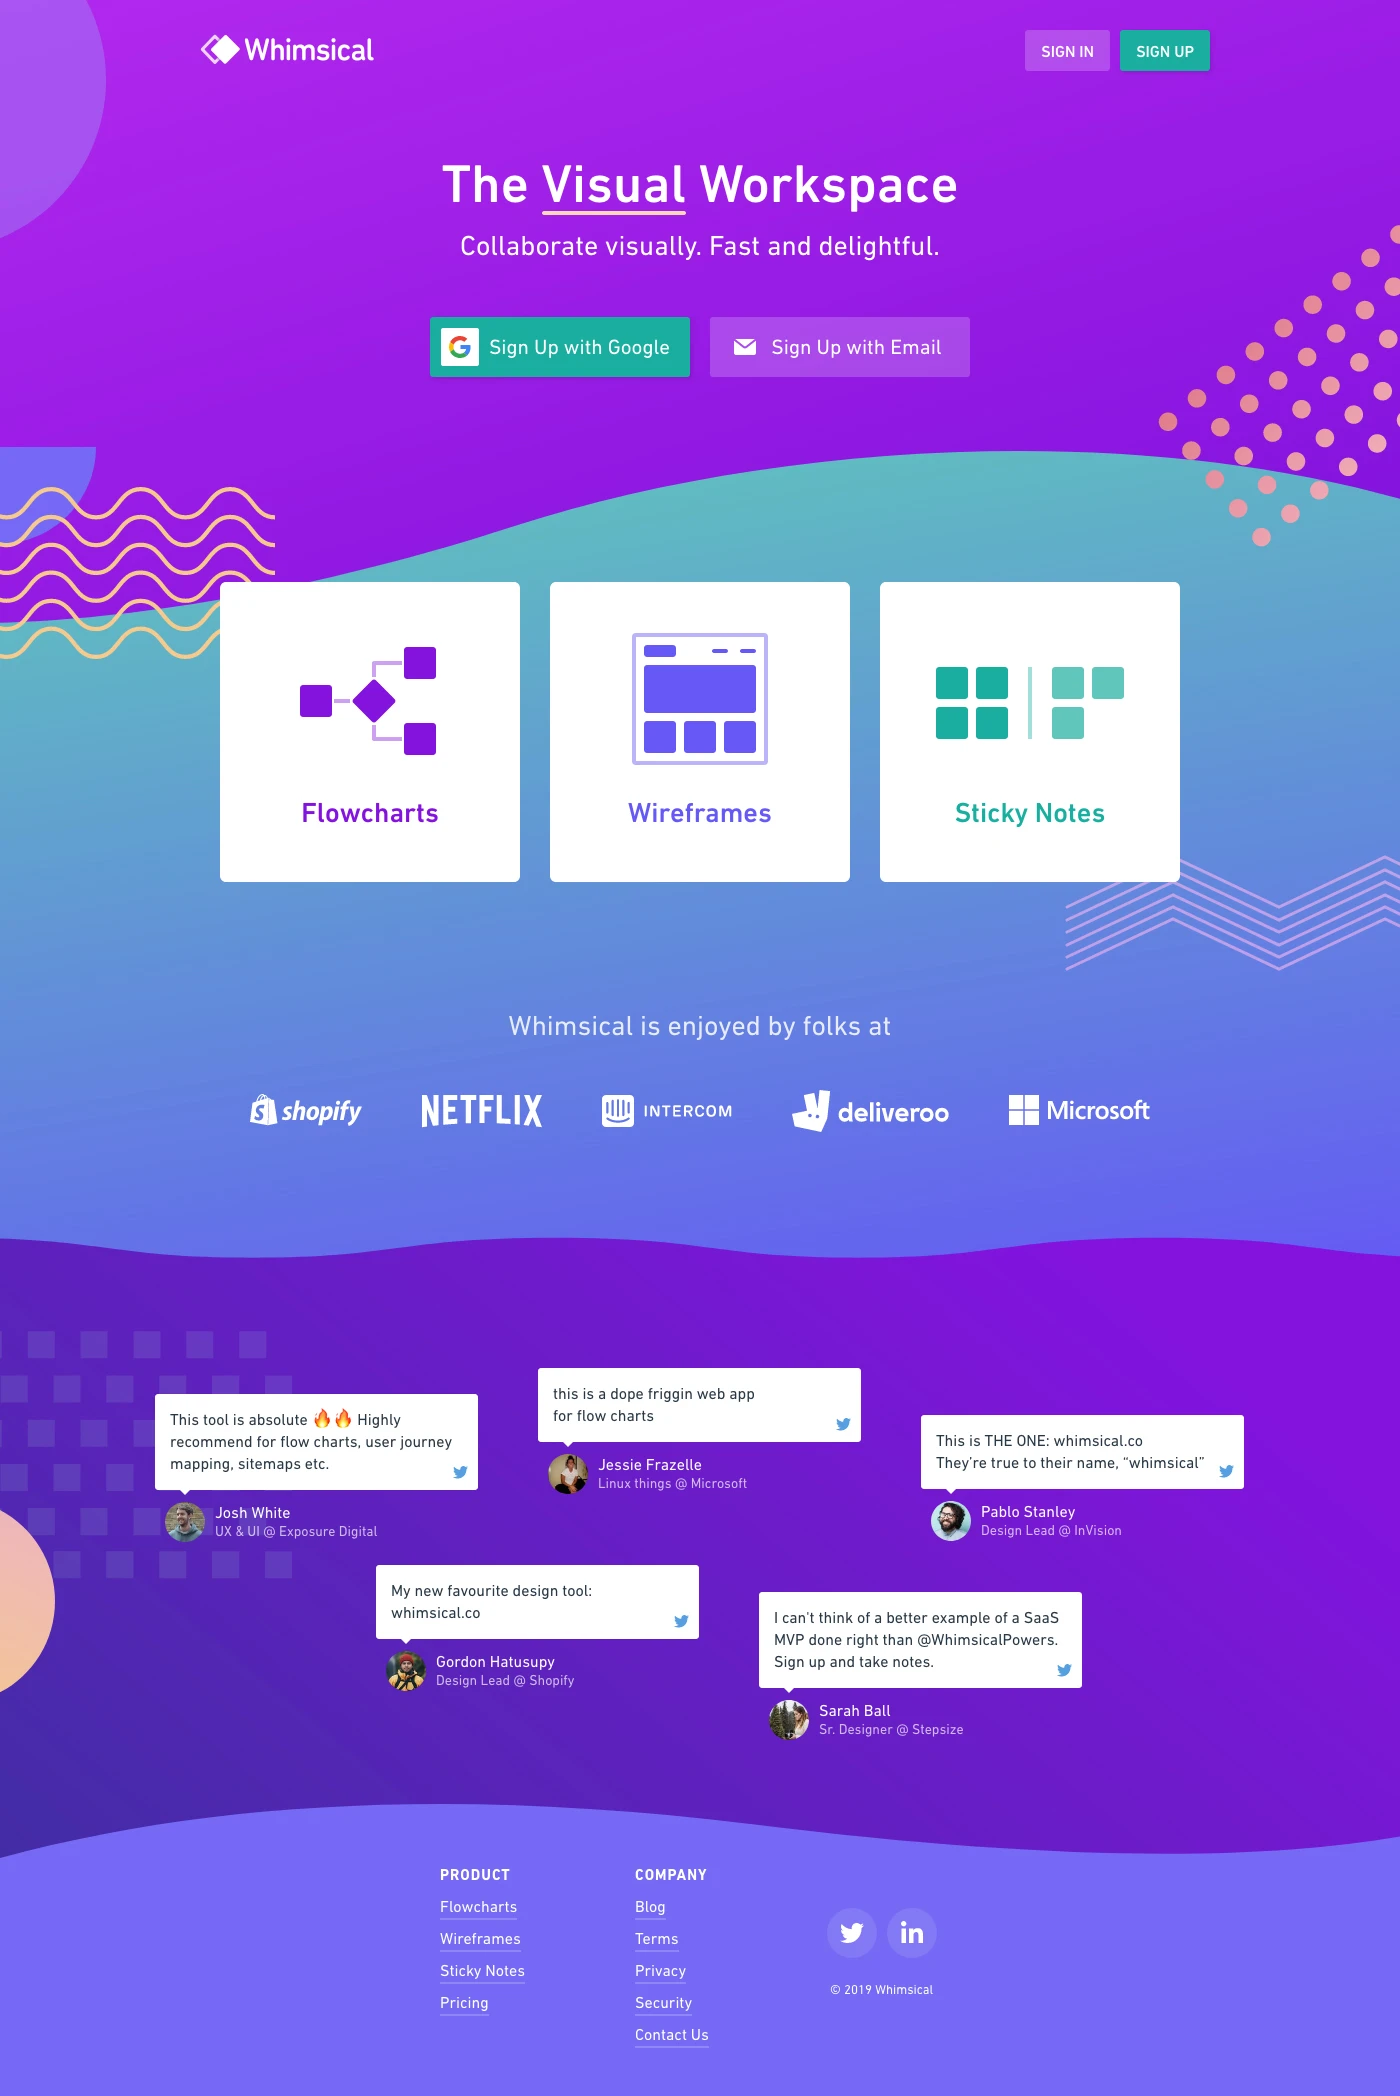 Whimsical Landing Page Example: Collaborate visually! Craft flows with Flowcharts, design UIs with Wireframes and run projects with Sticky Notes. Whimsical is fast and delightful.